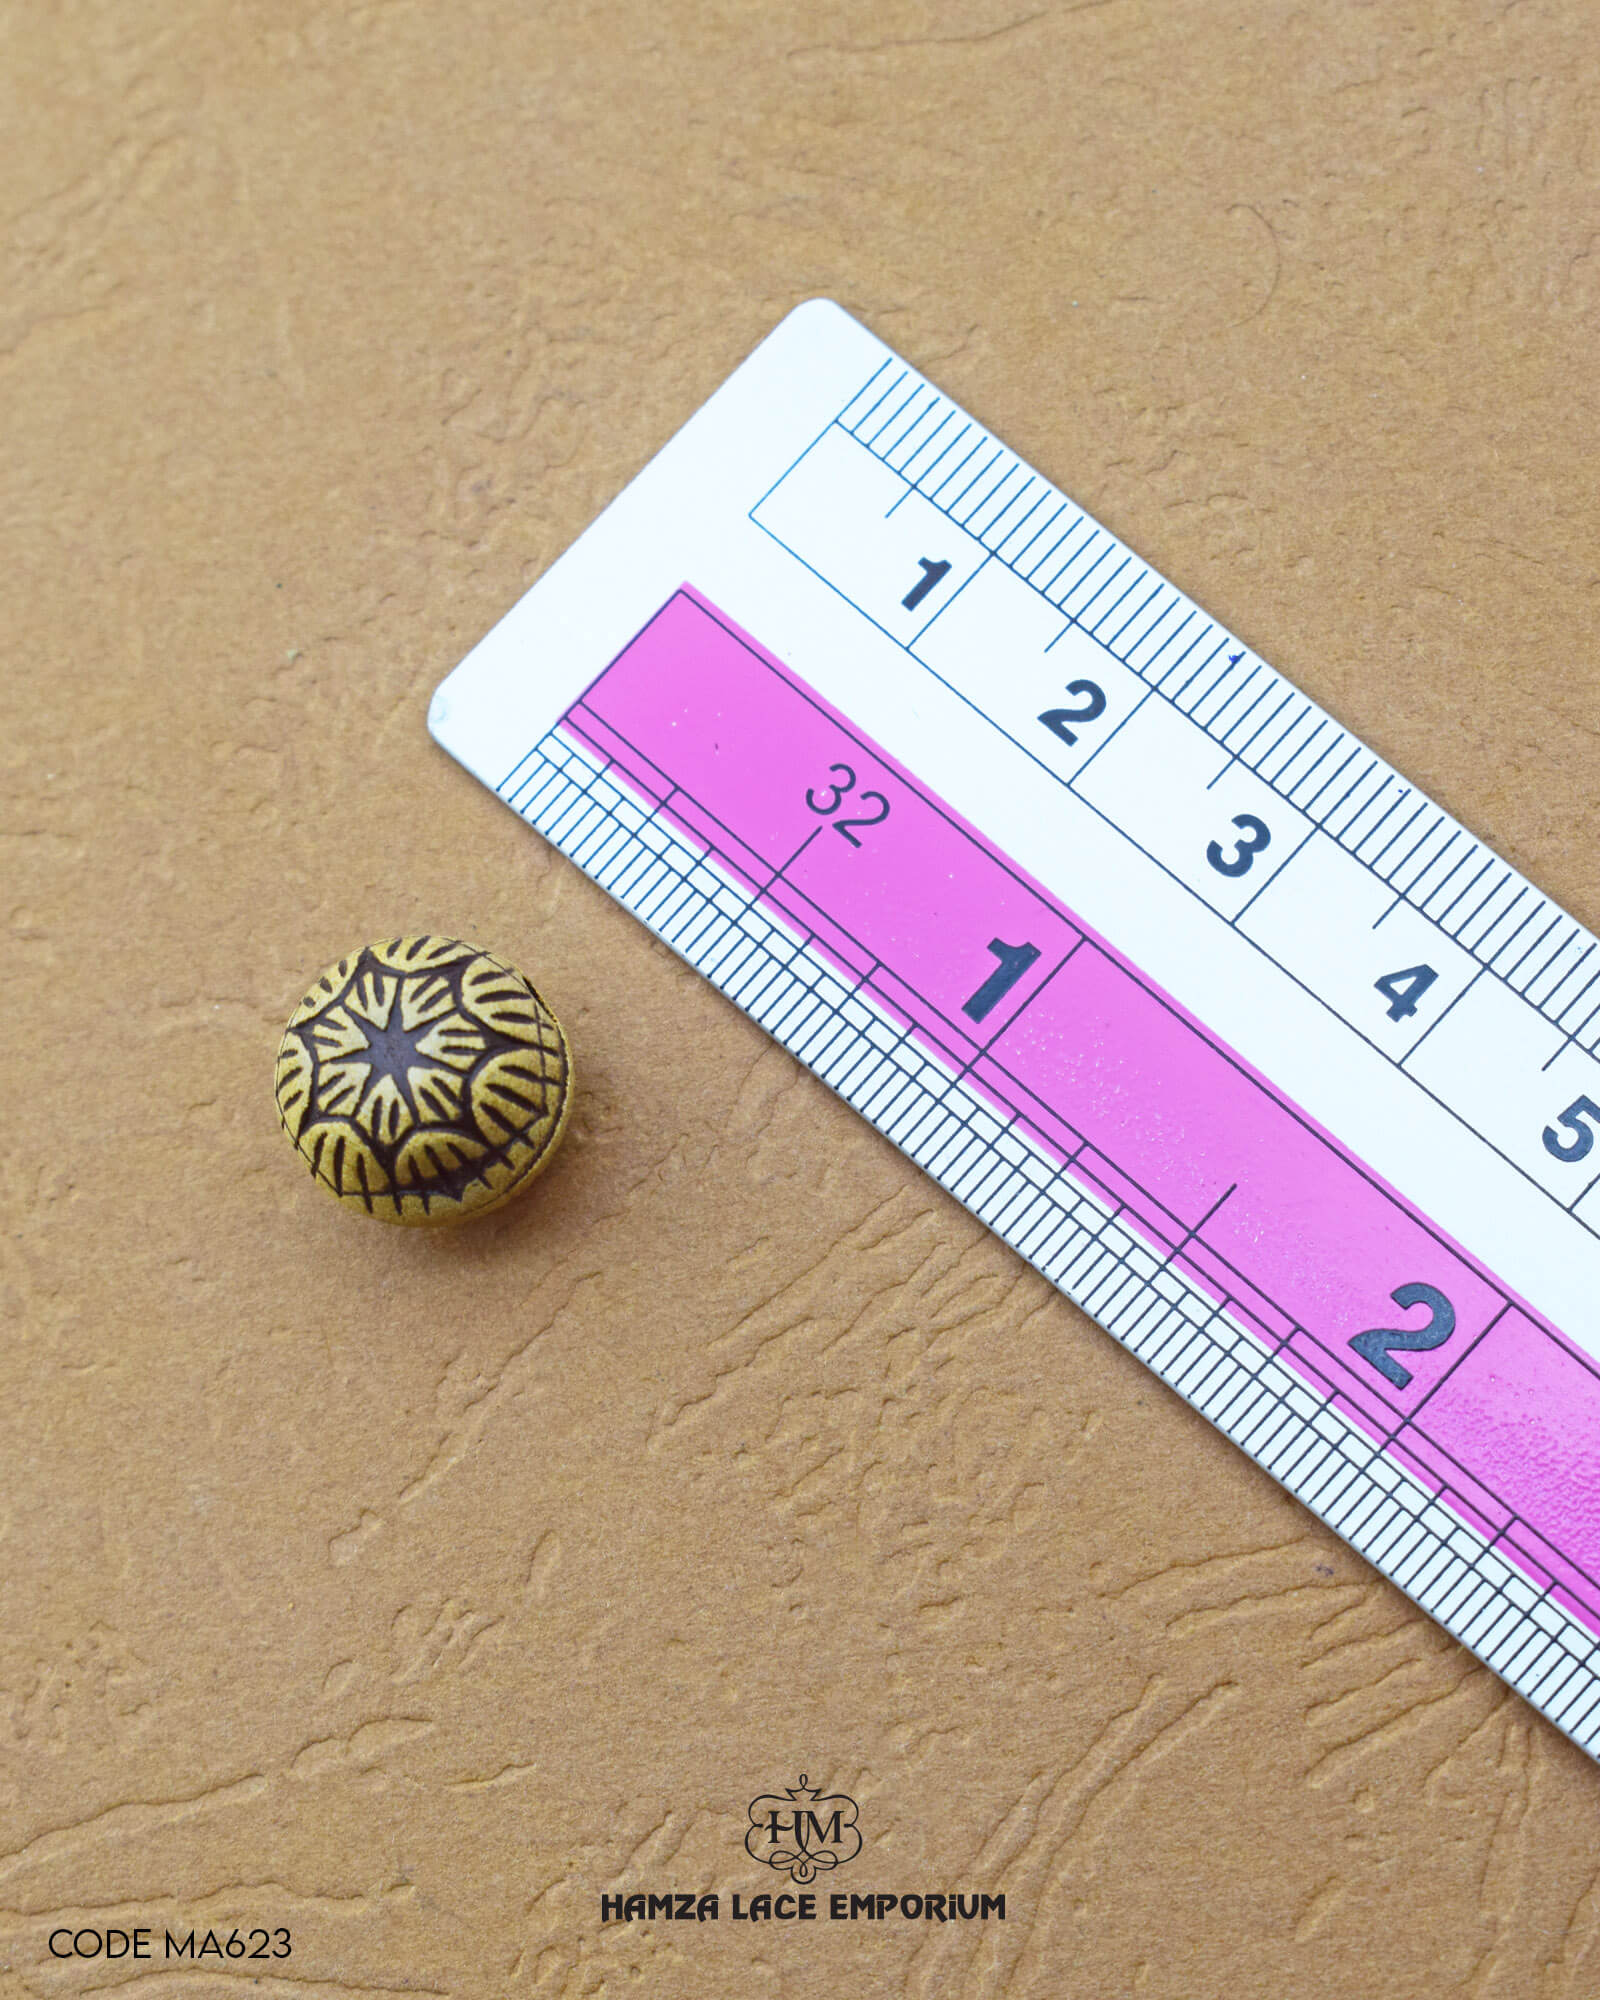 Size of the 'Dome Design Button MA623' is shown with a ruler